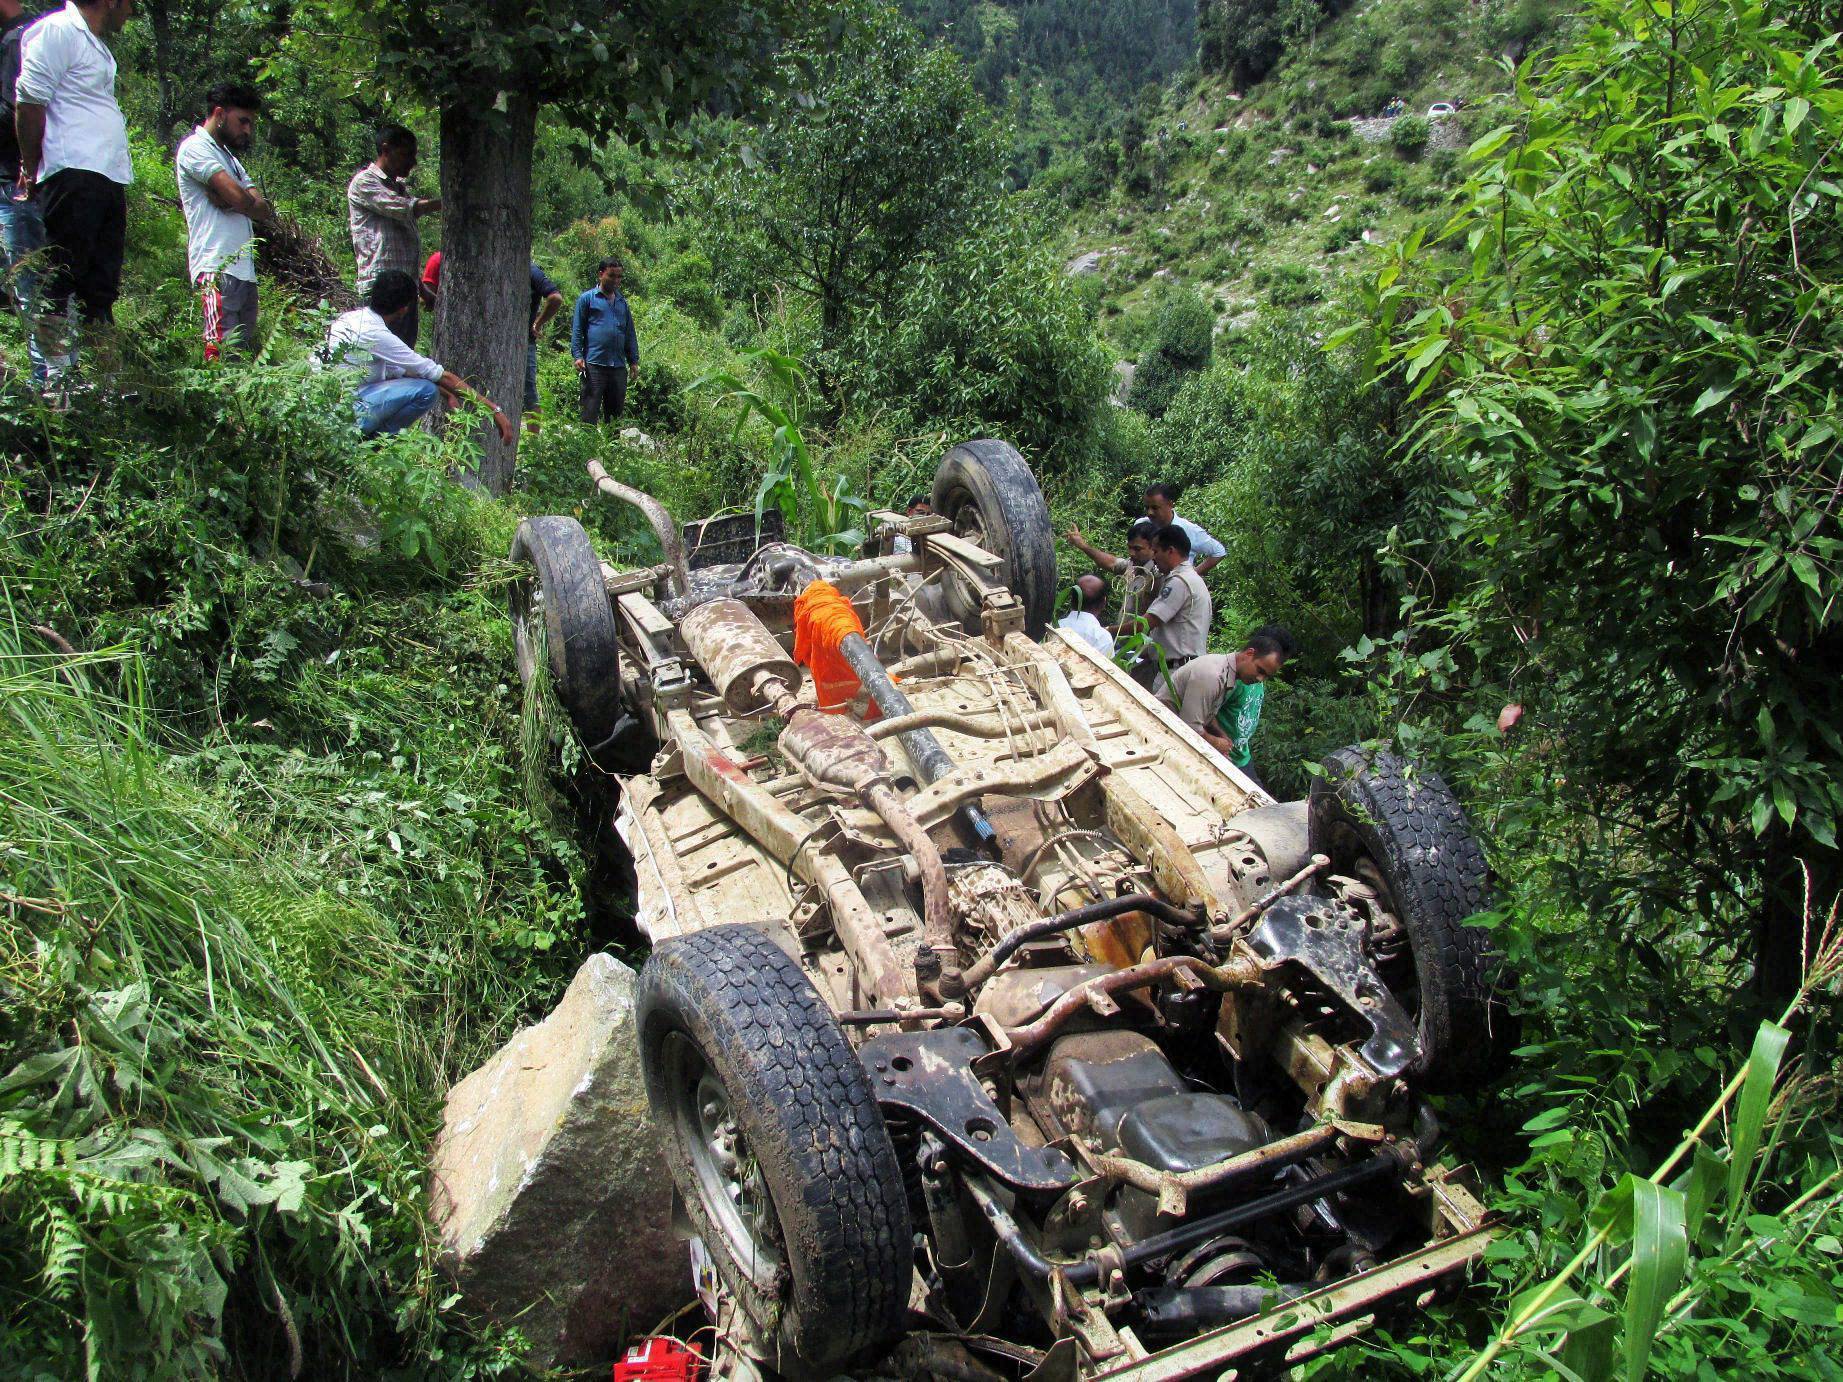 10 killed, 9 injured in separate road accidents in Himachal